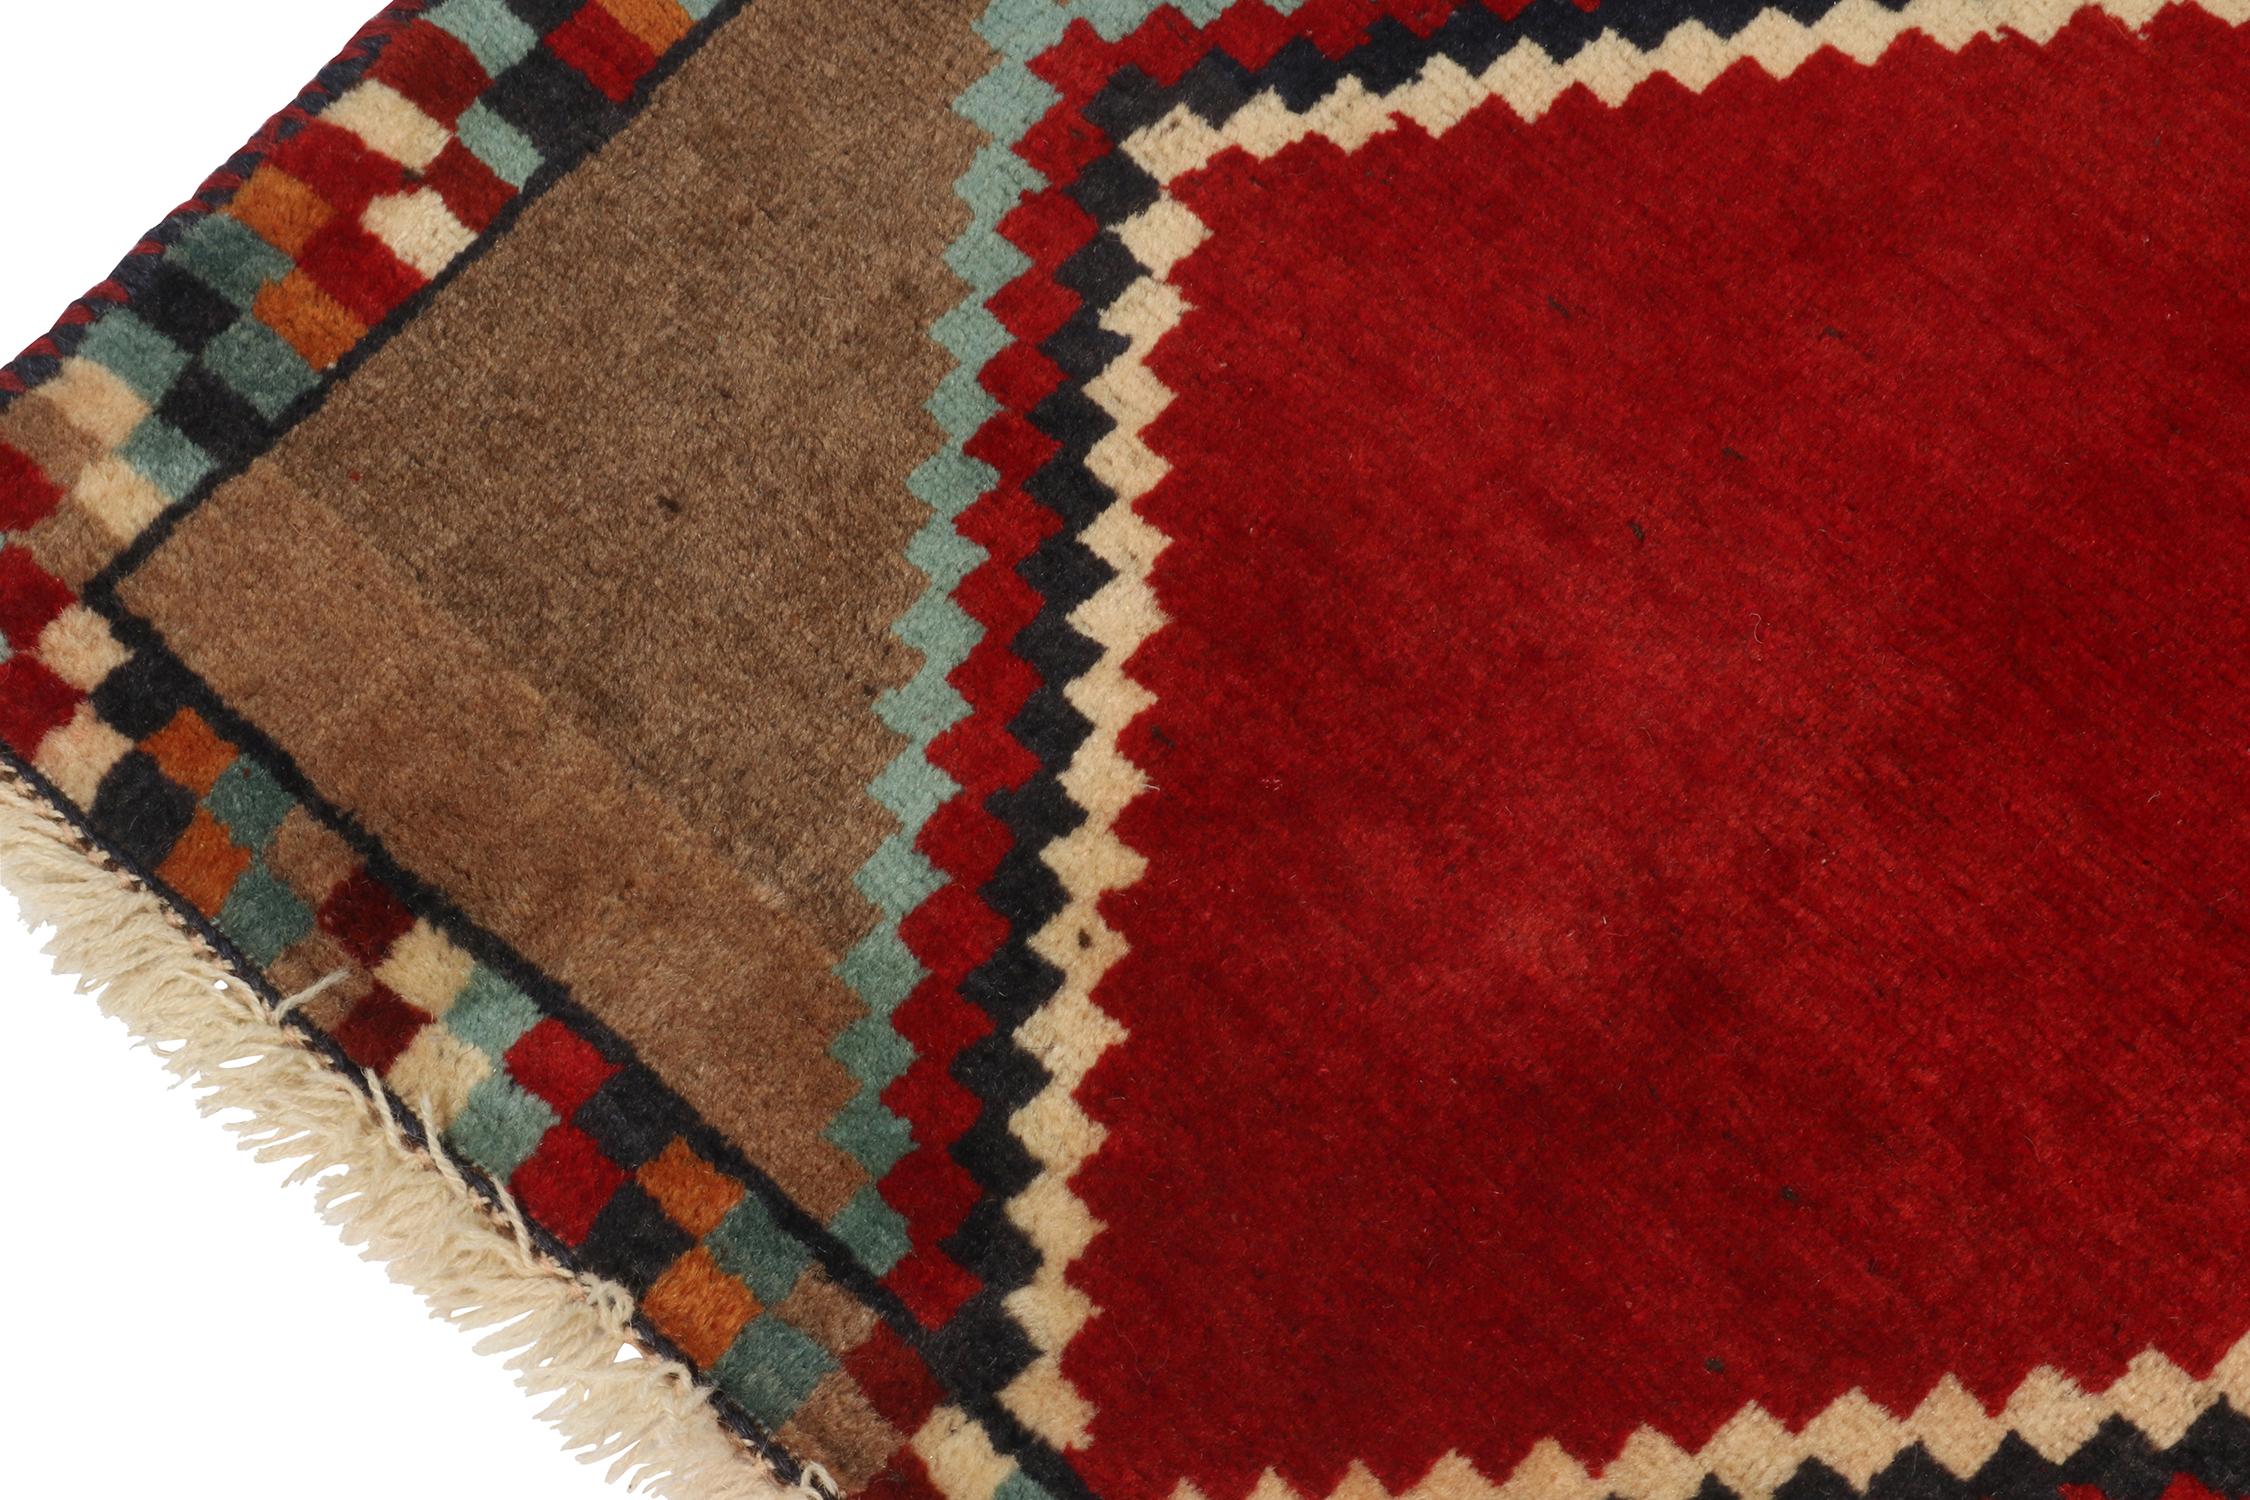 Vintage Gabbeh Tribal Rug in Brown Diamond Lozenge Pattern by Rug & Kilim In Good Condition For Sale In Long Island City, NY